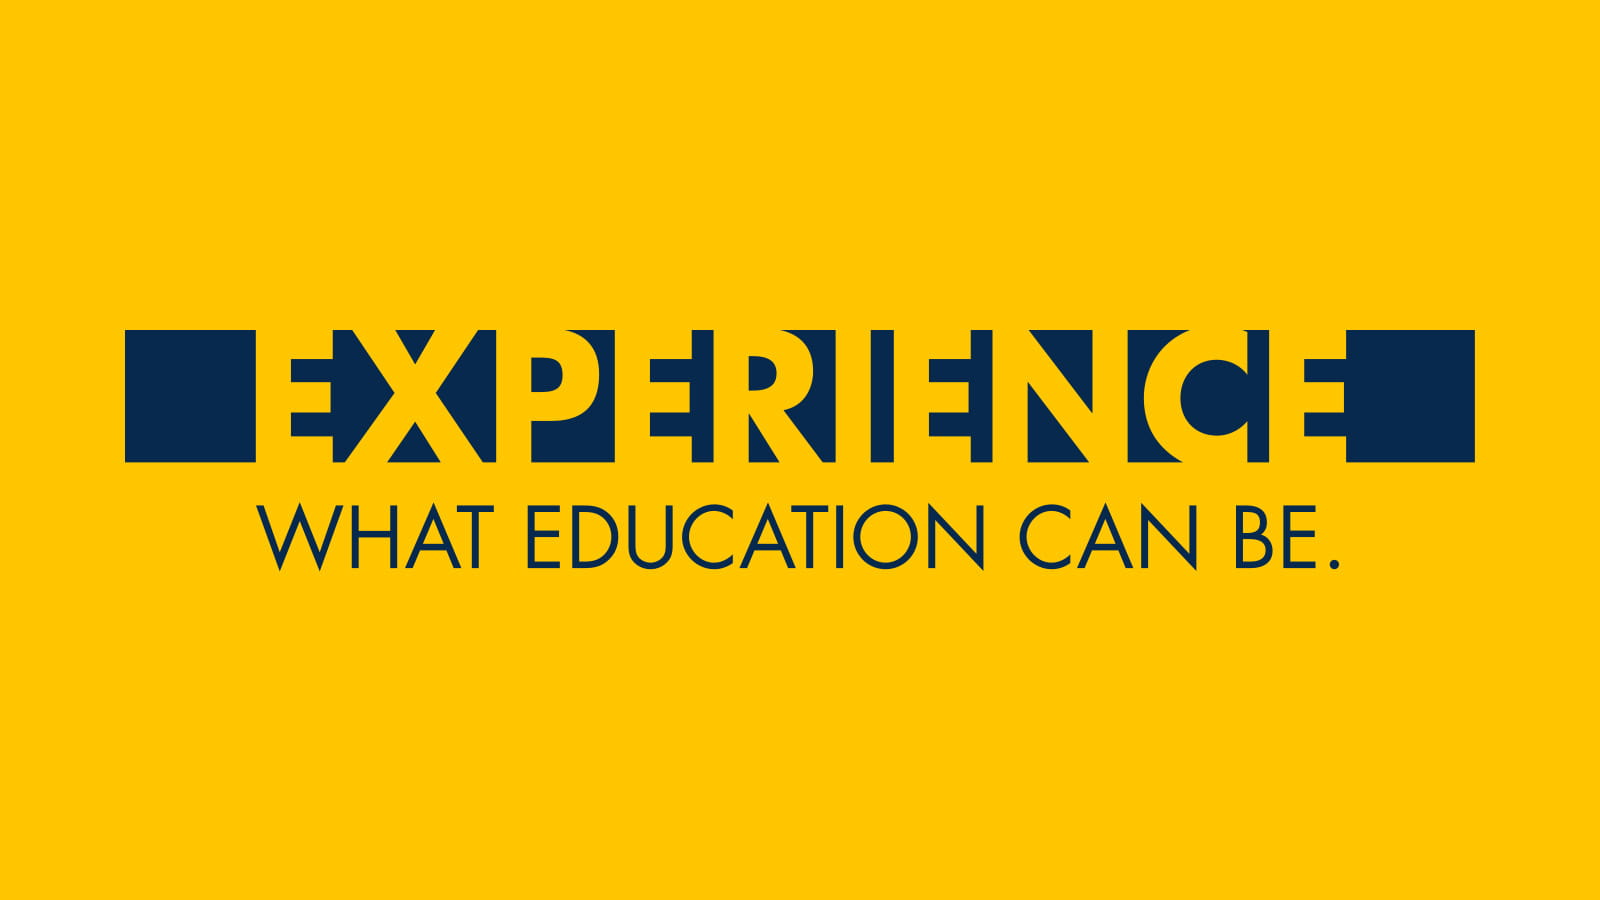 Experience what education can be